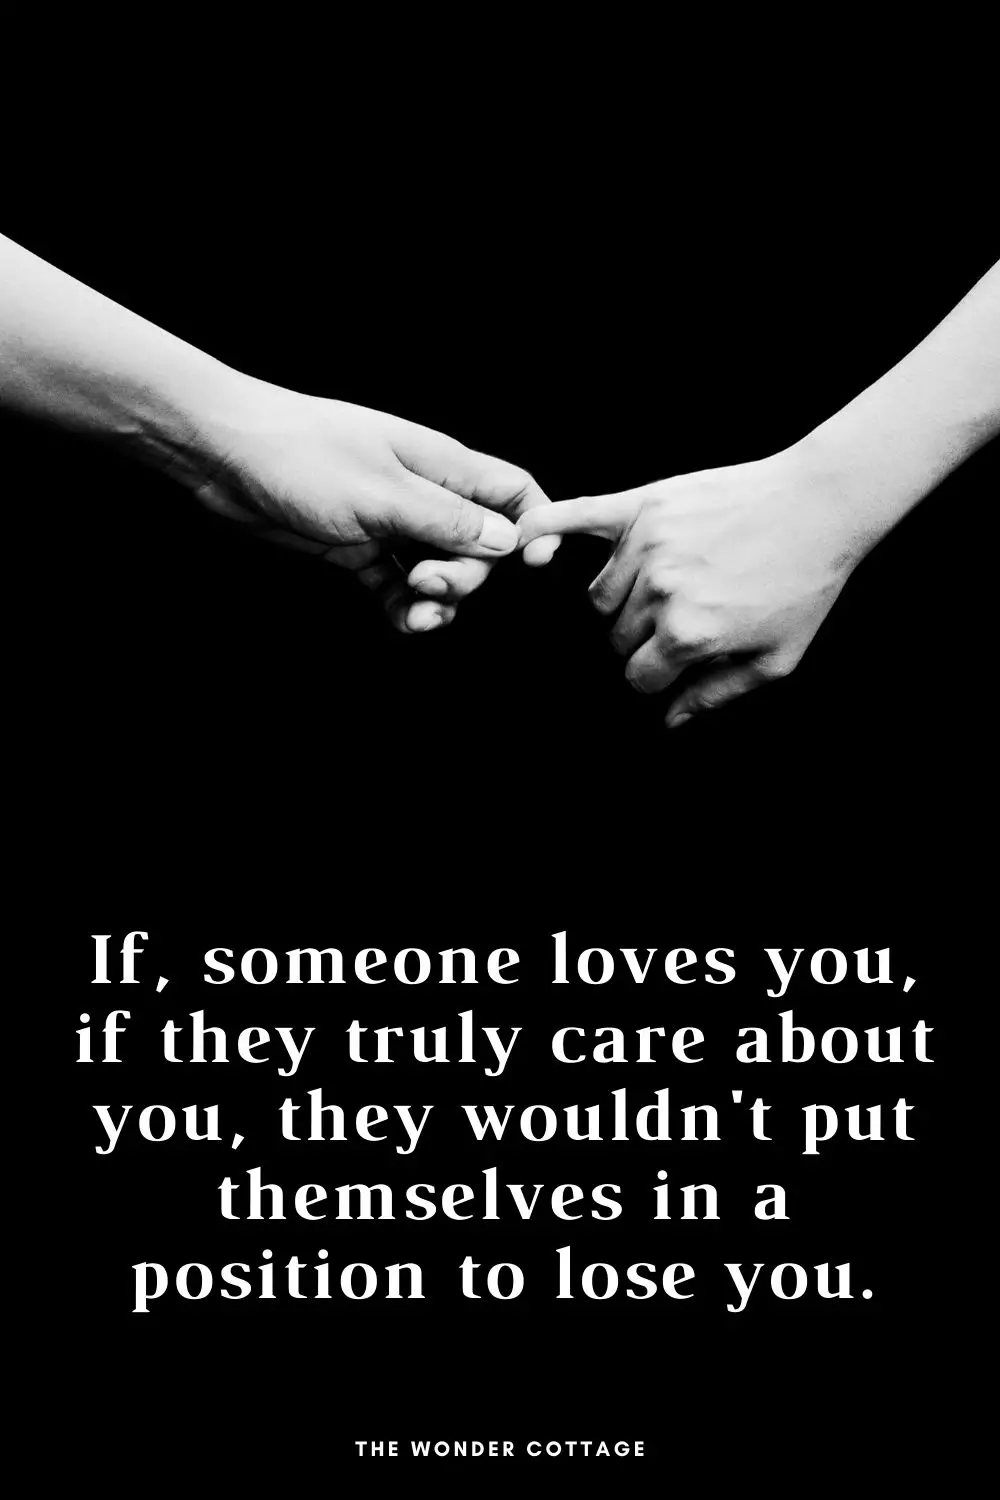 If someone loves you, if they truly care about you, they wouldn't put themselves in a position to lose you